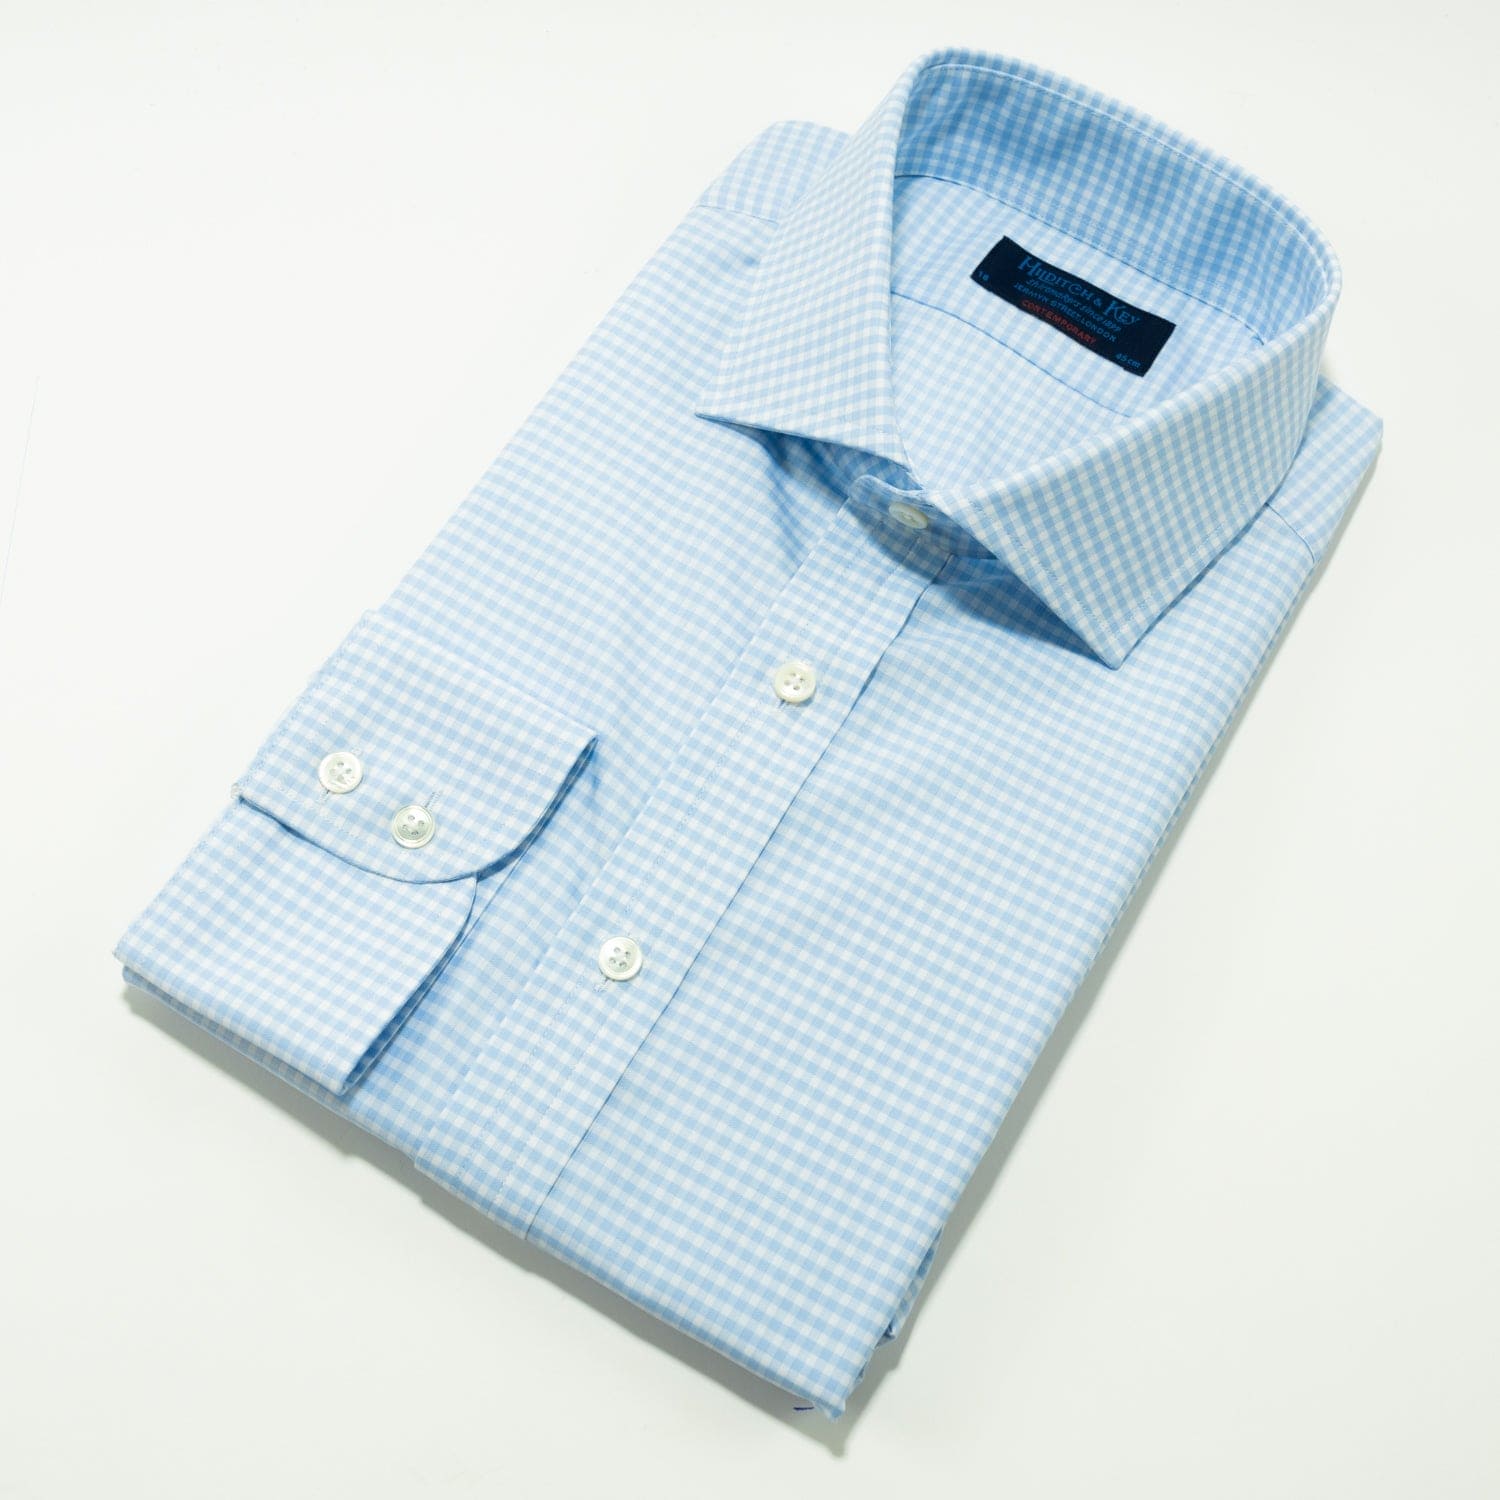 Contemporary Fit, Cutaway Collar, 2 Button Cuff Shirt in Sky Blue Twill Check